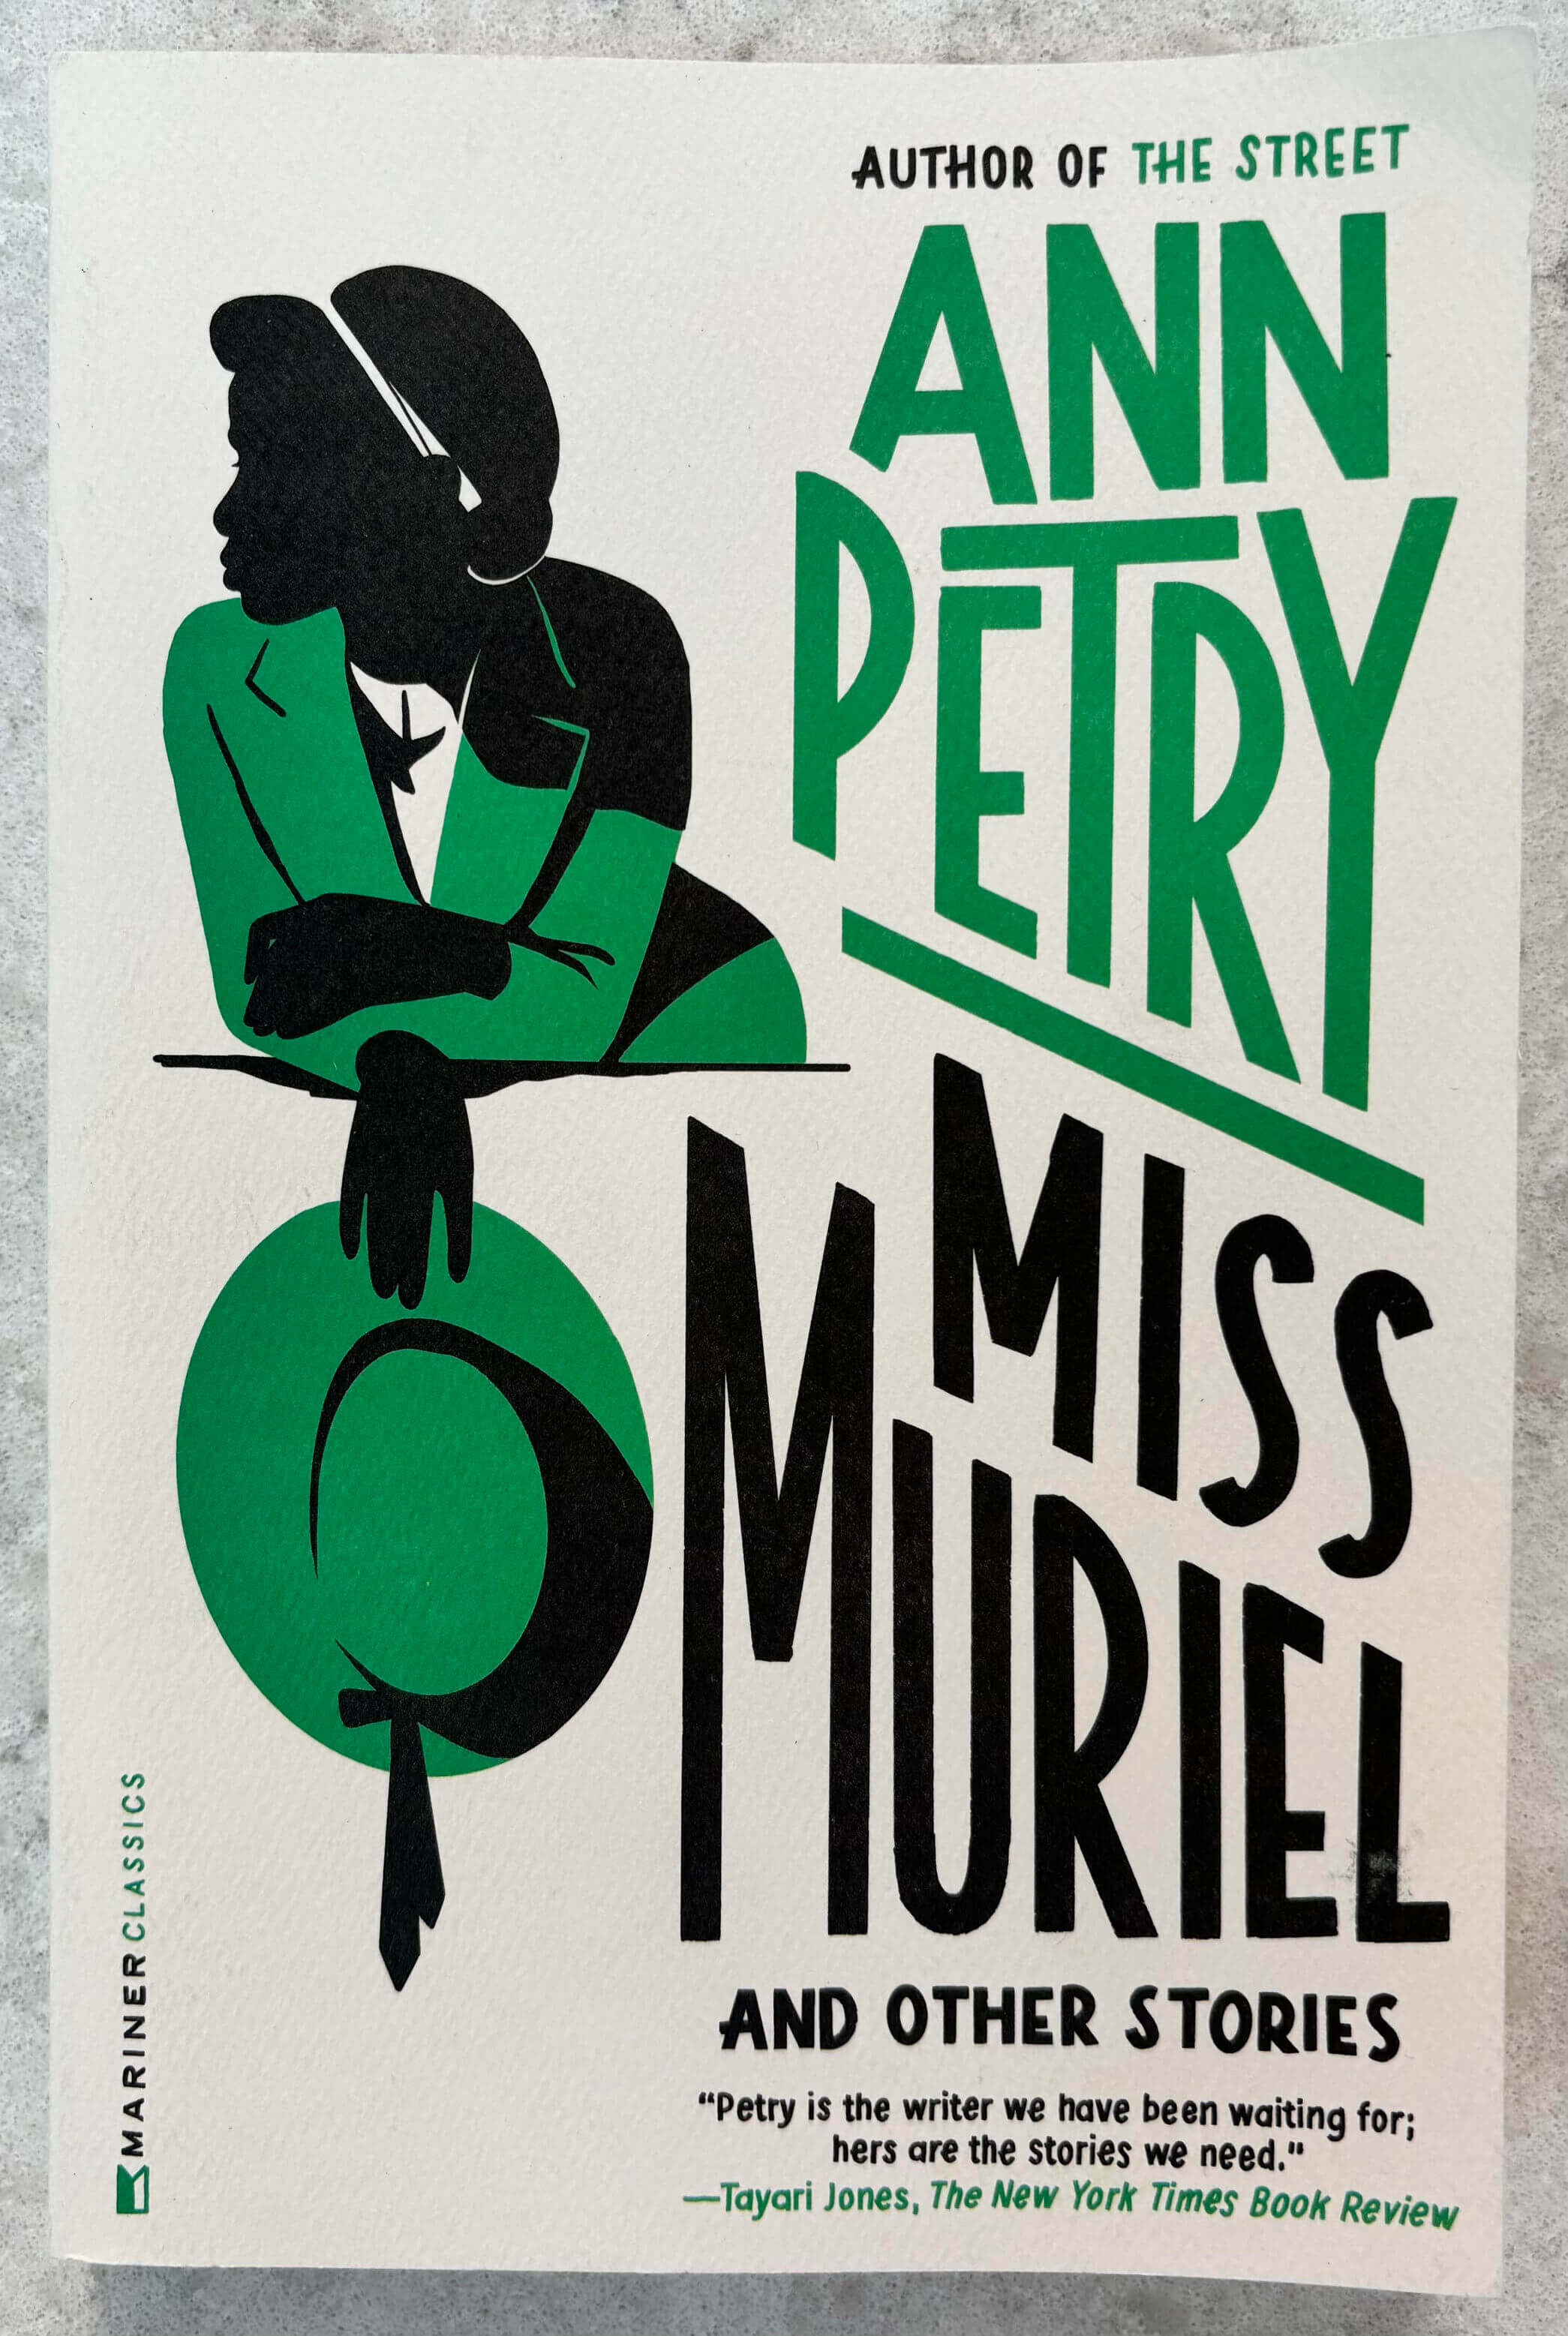 “Miss Muriel and Other Stories” by Ann Petry